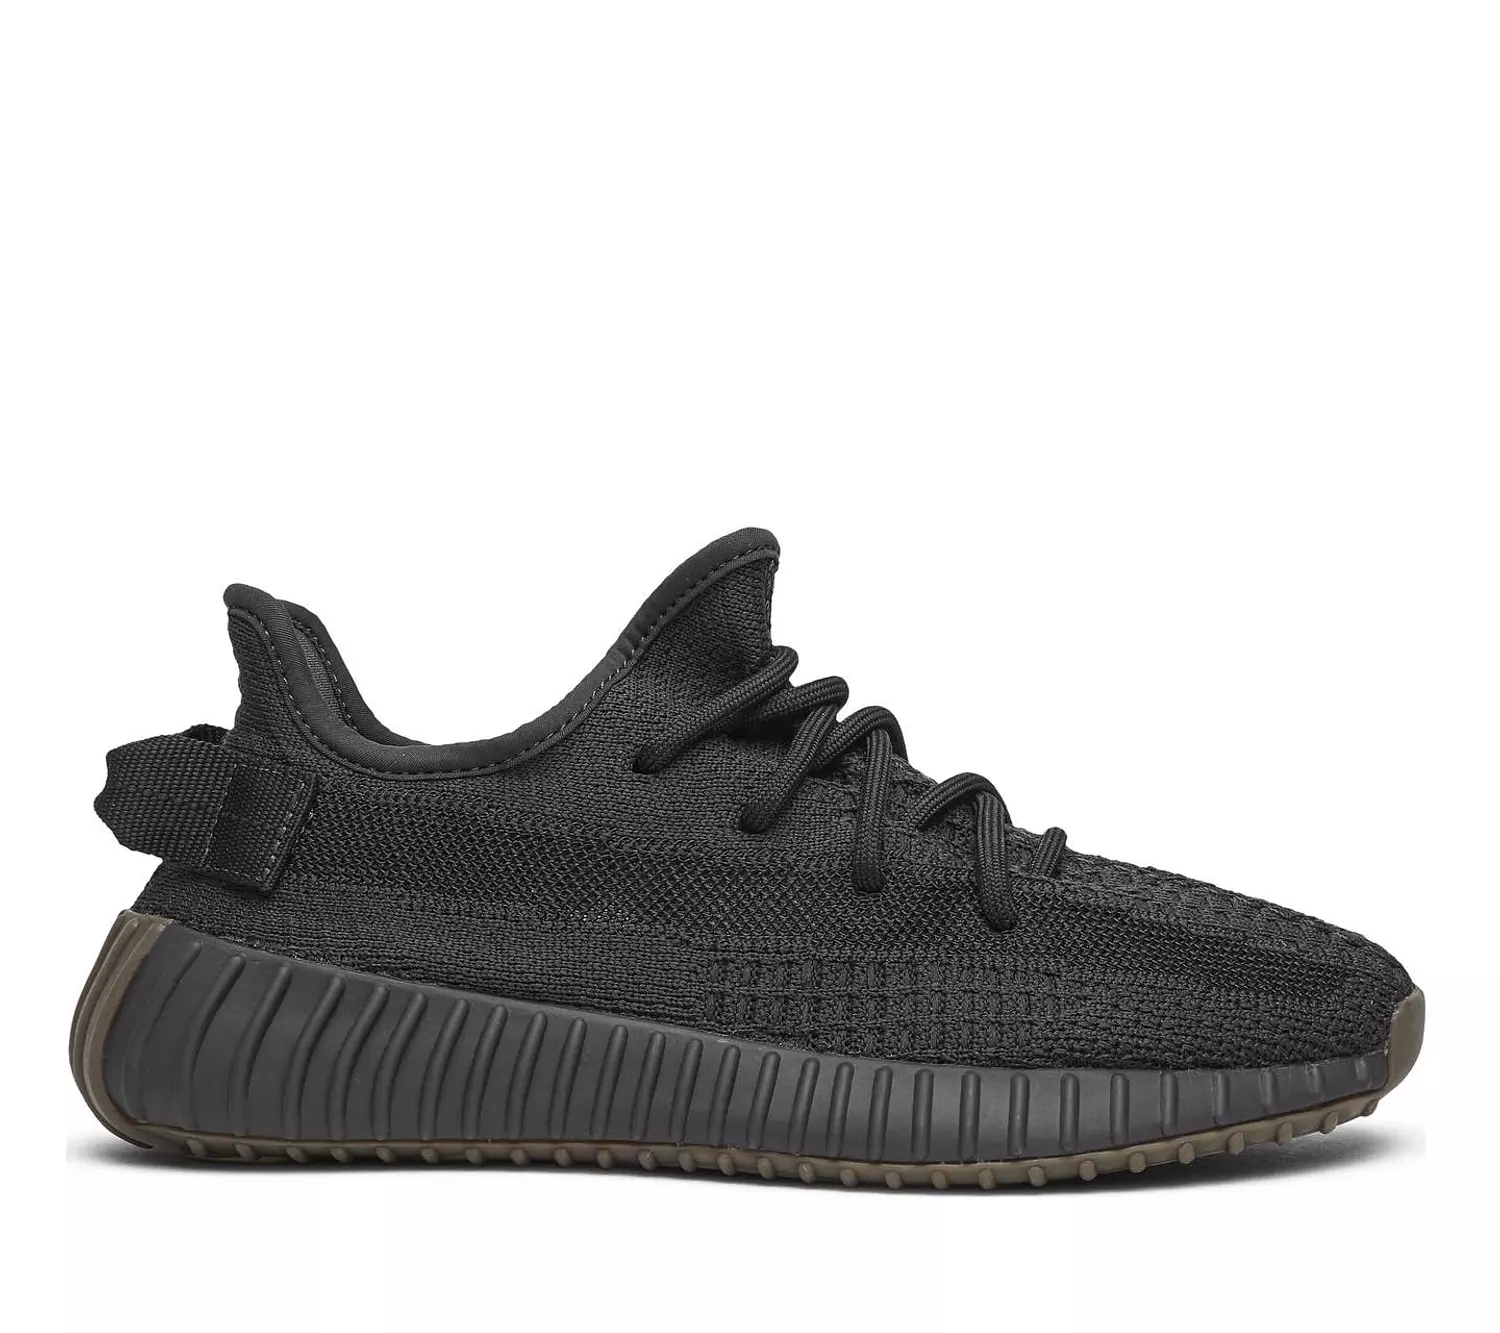 Yeezy Boost 350 "Cinder Non-Reflective" hover image